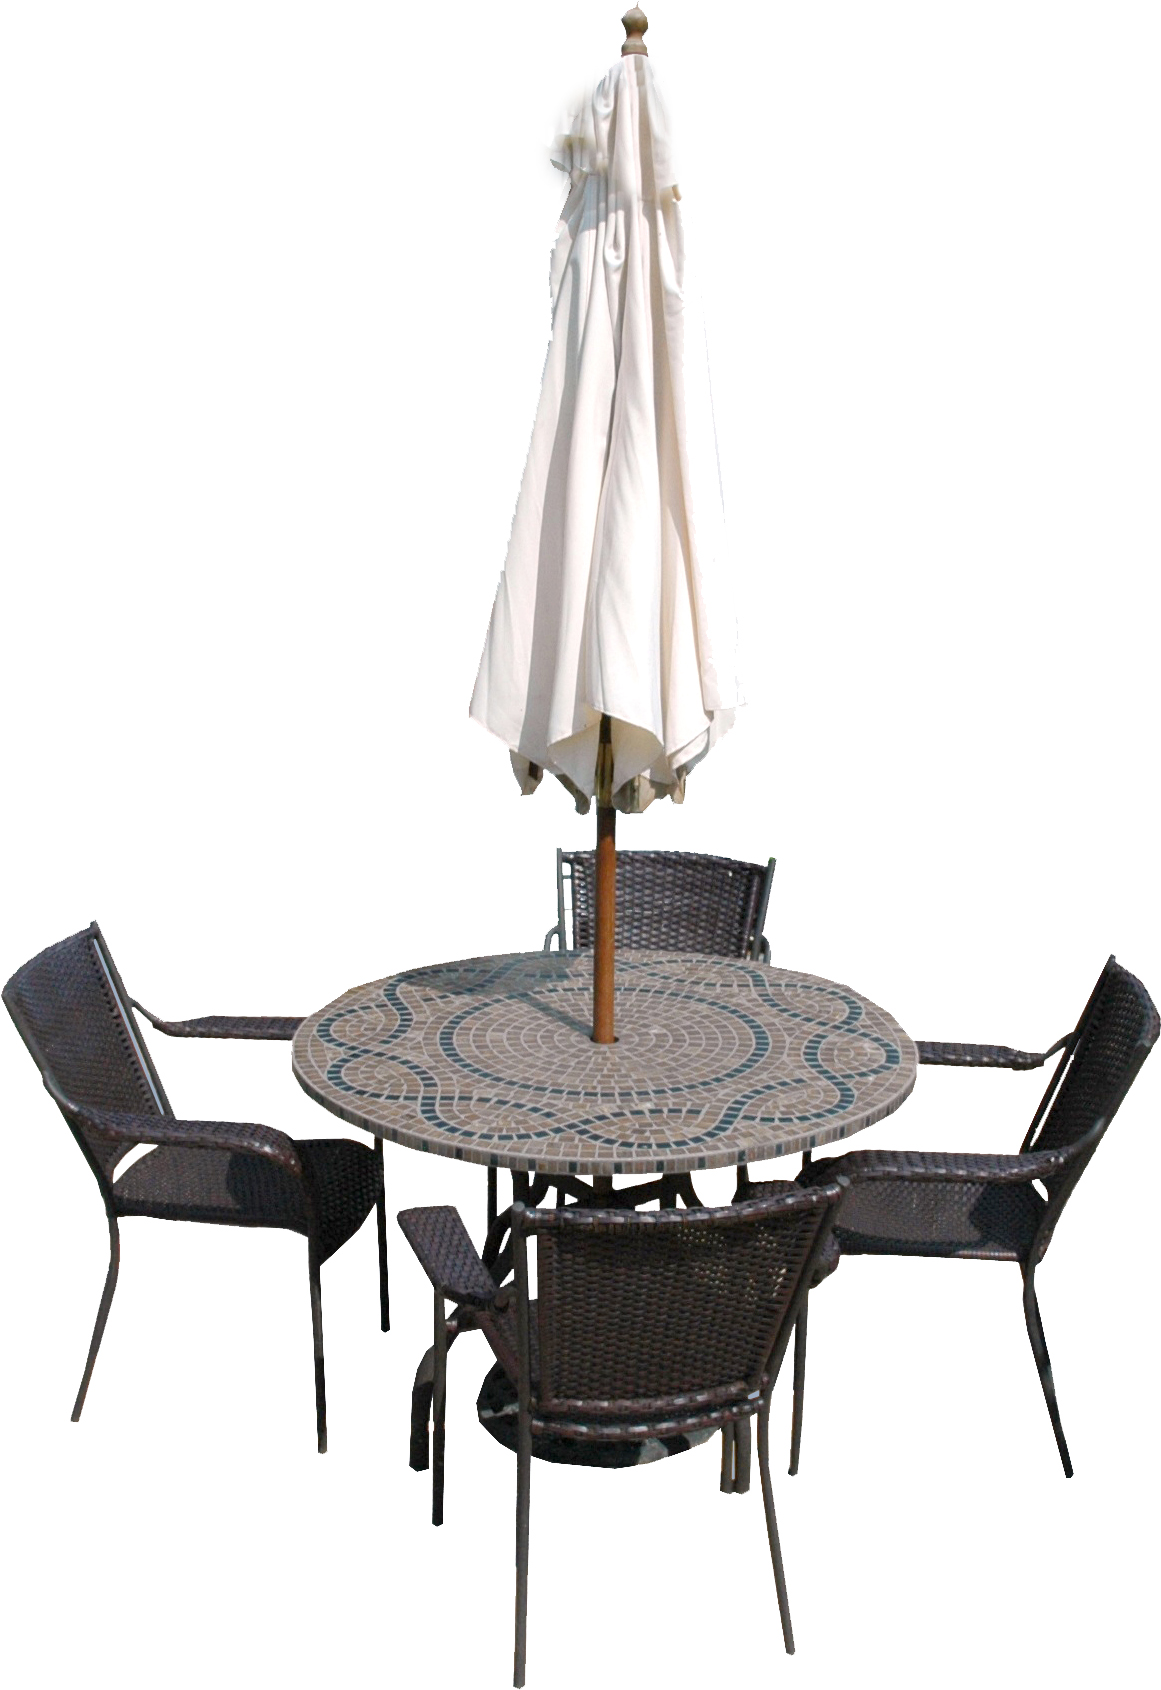 Garden Table and Chairs with Umbrella